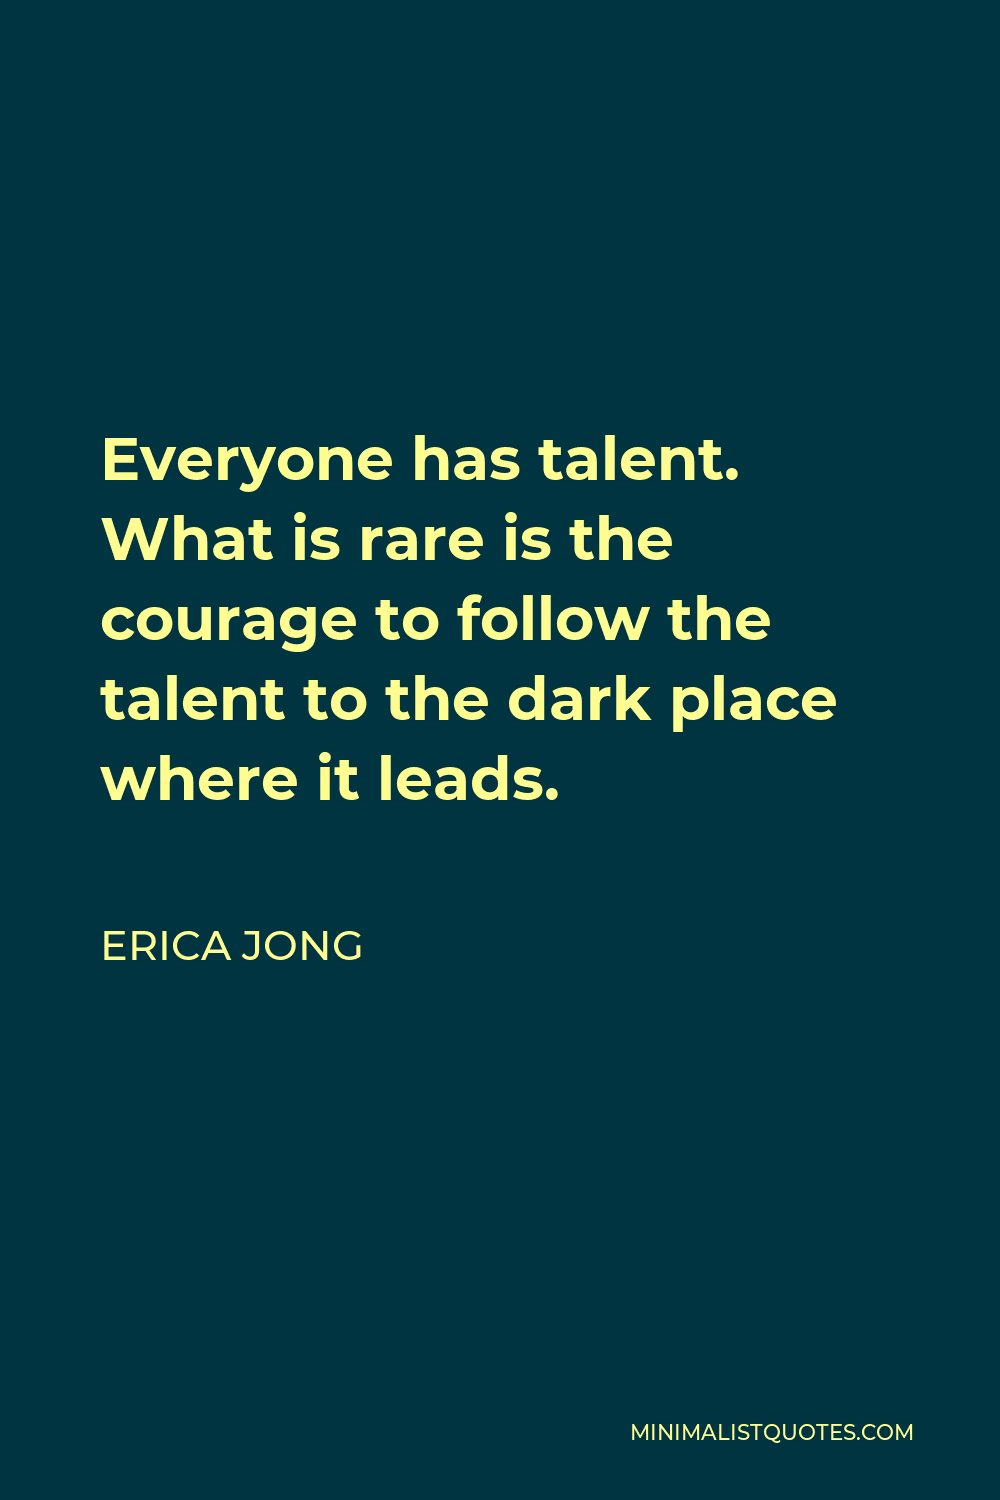 Erica Jong Quote - Everyone has talent. What is rare is the courage to follow the talent to the dark place where it leads.